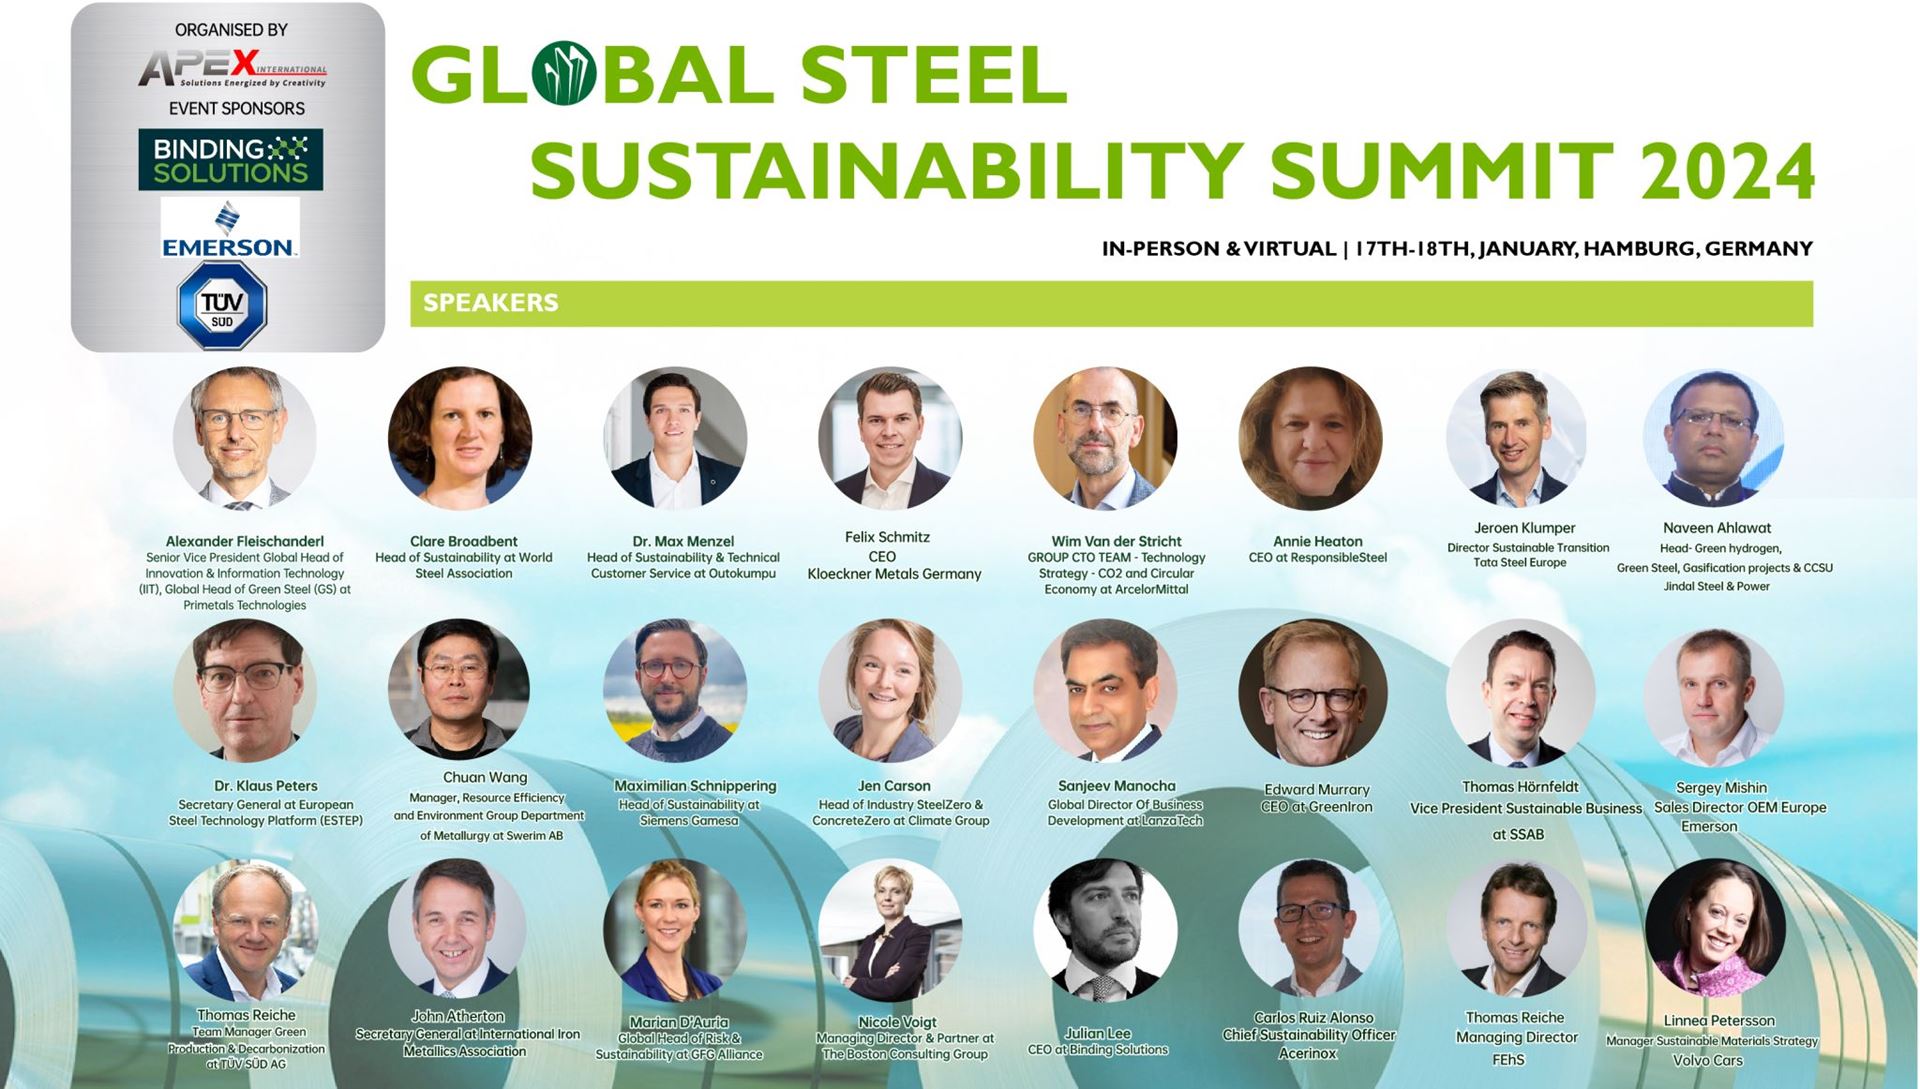 The Global Steel Sustainability Summit 2024 will take place in Hamburg, Germany, on January 17-18